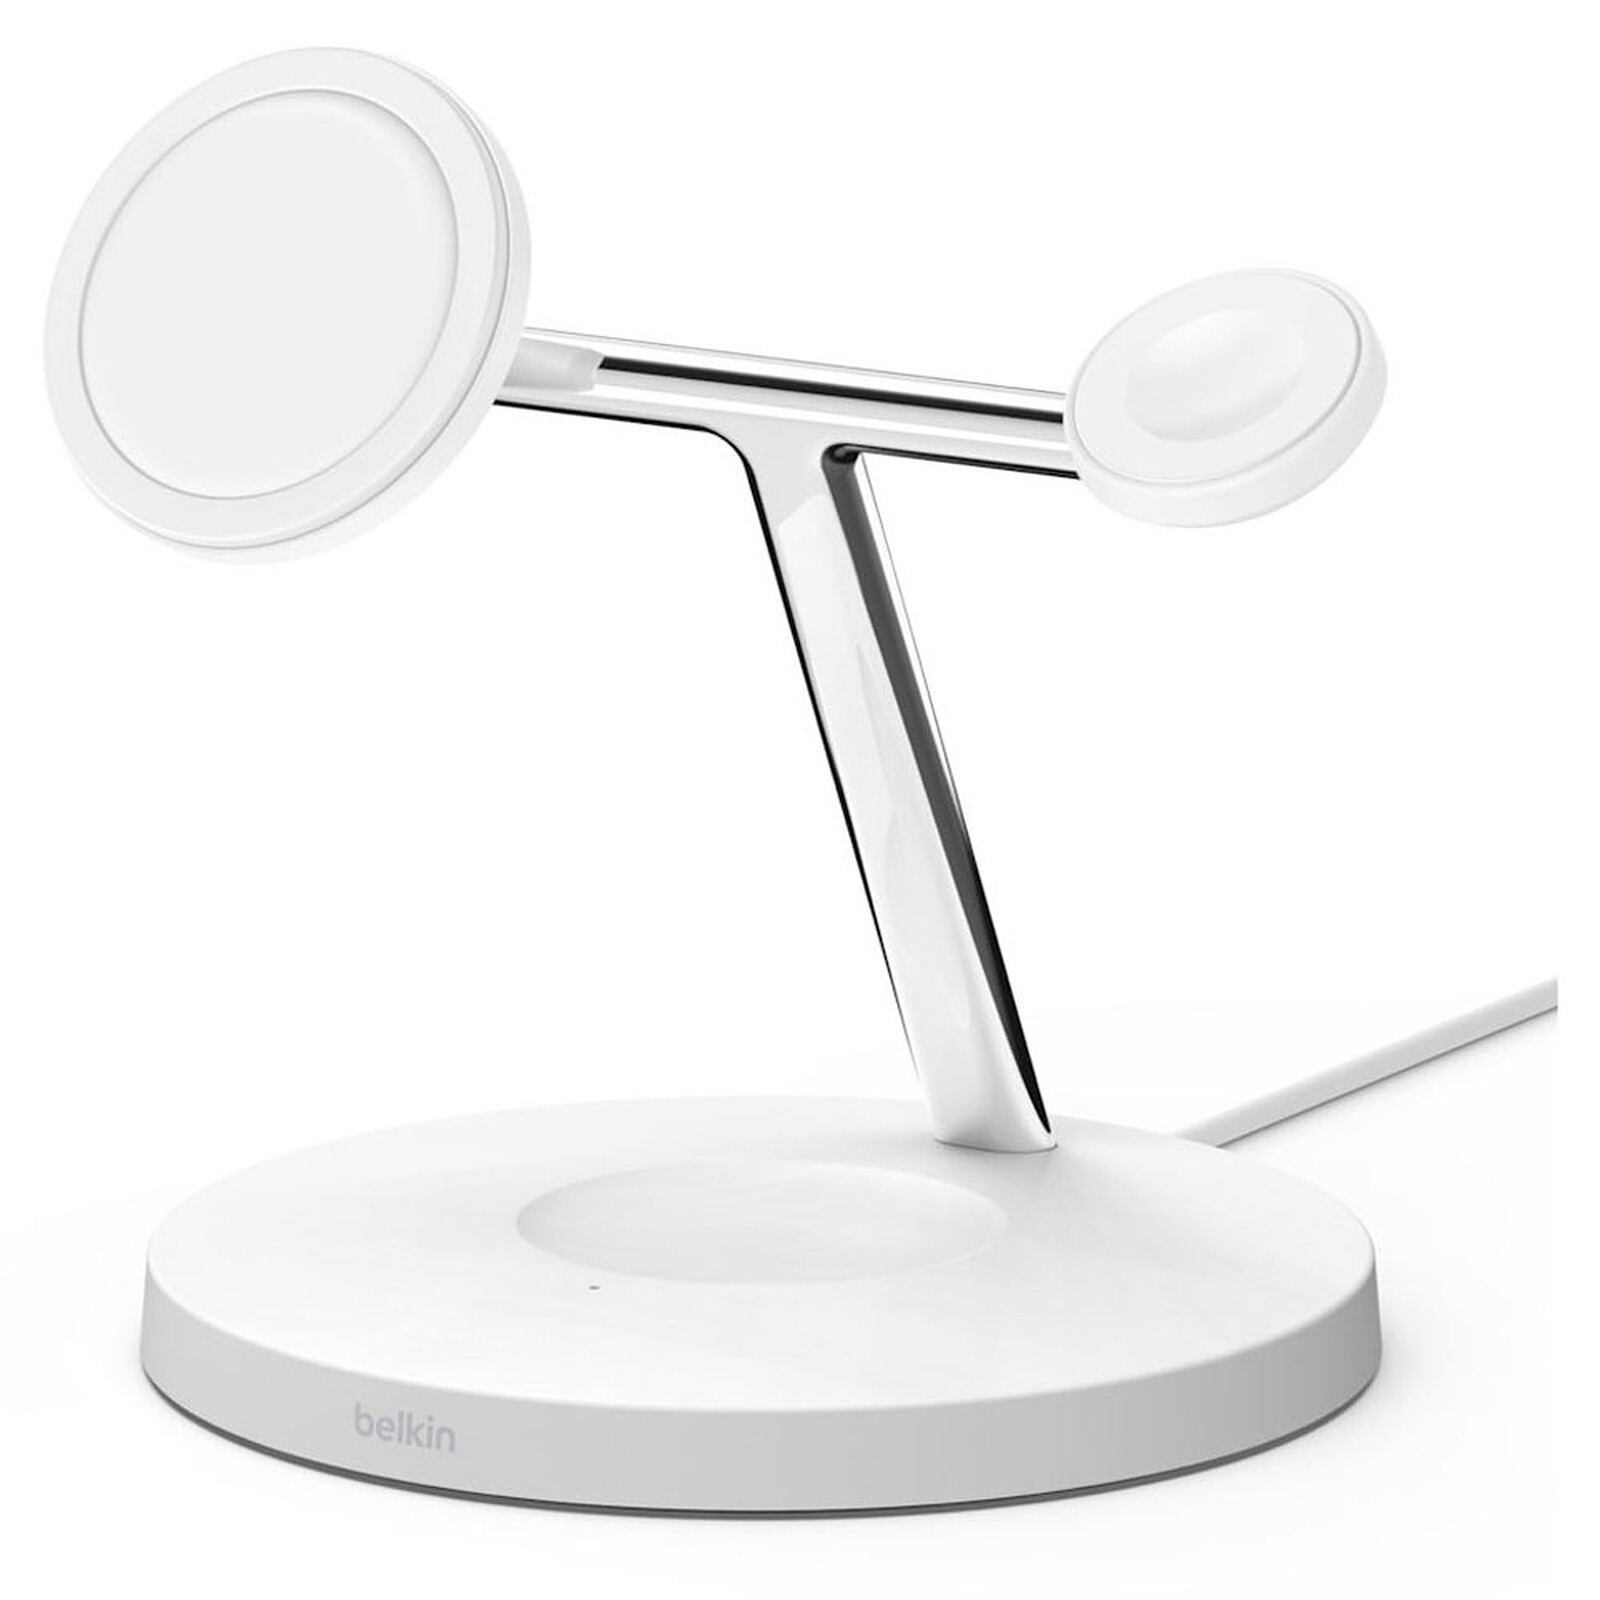 Chargeur induction Stand MagSafe